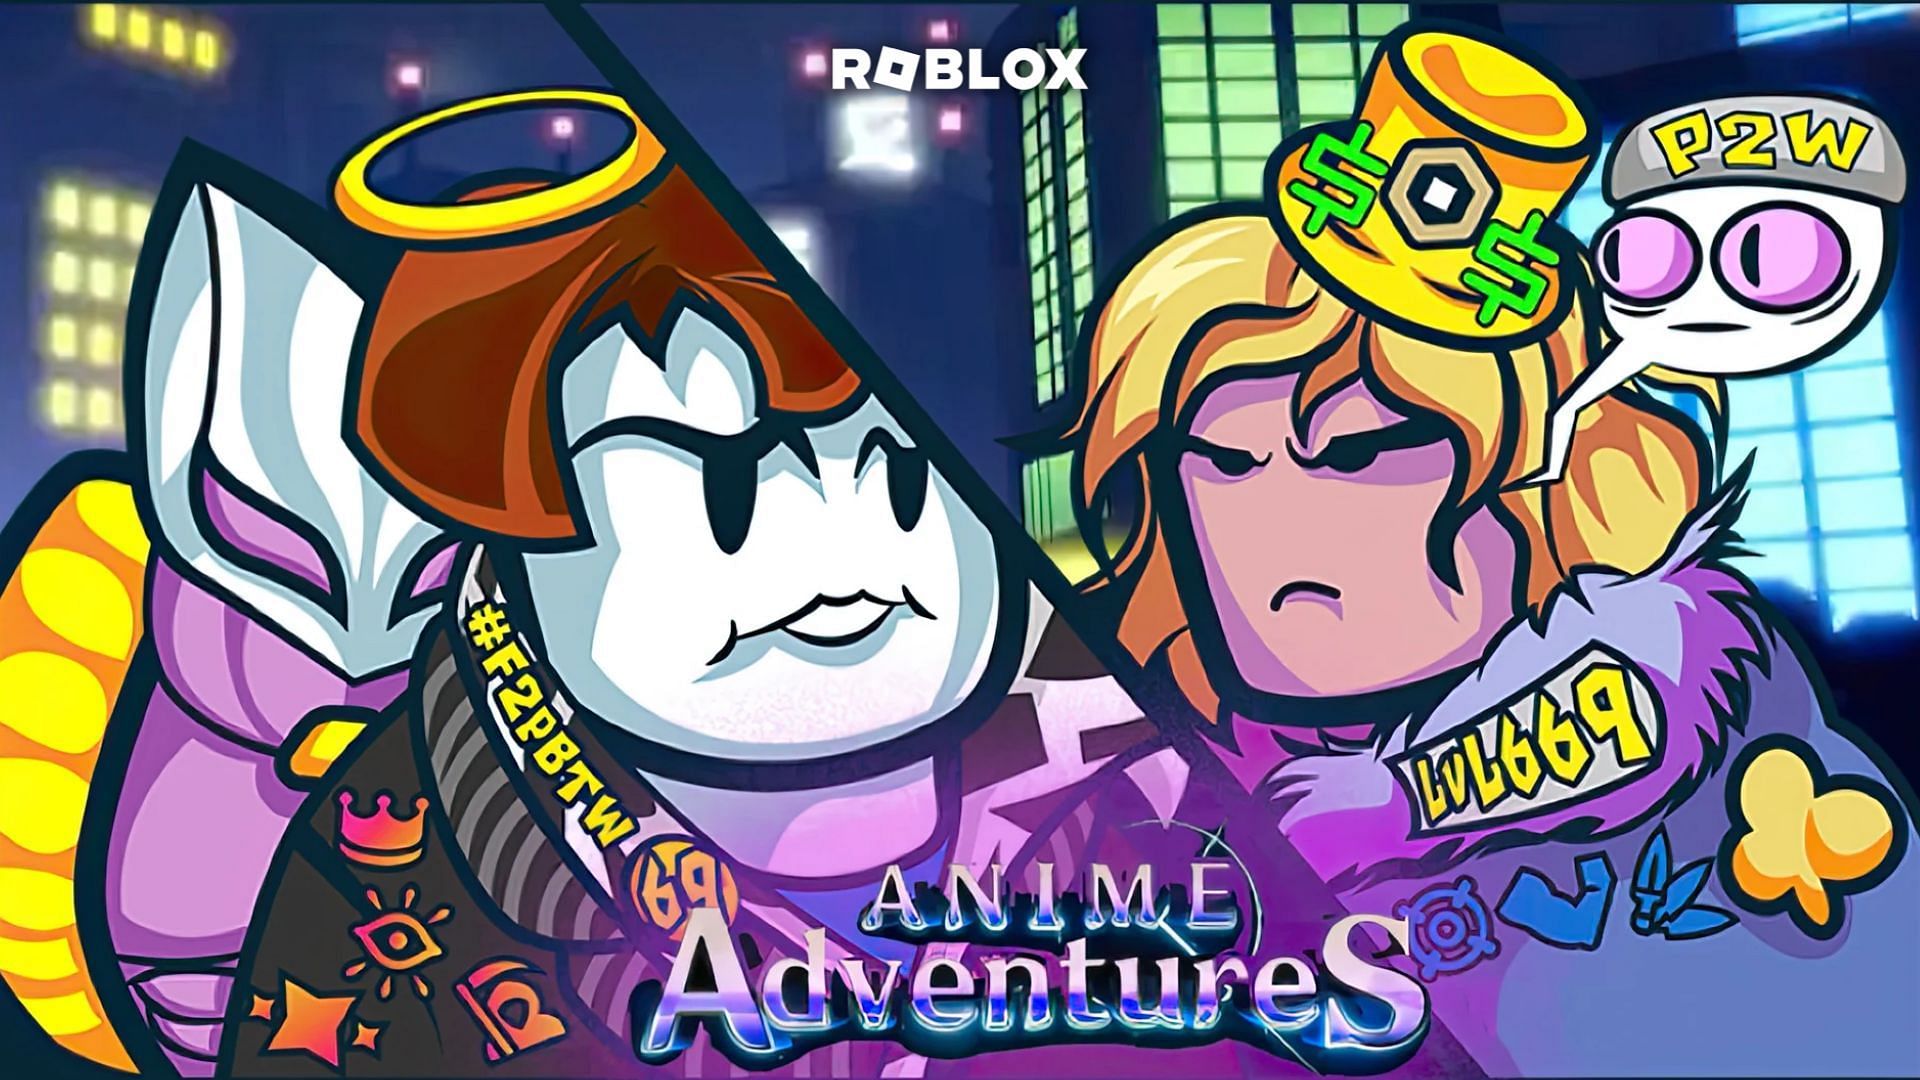 Official gameplay cover for Anime Adventures (Image via Roblox)